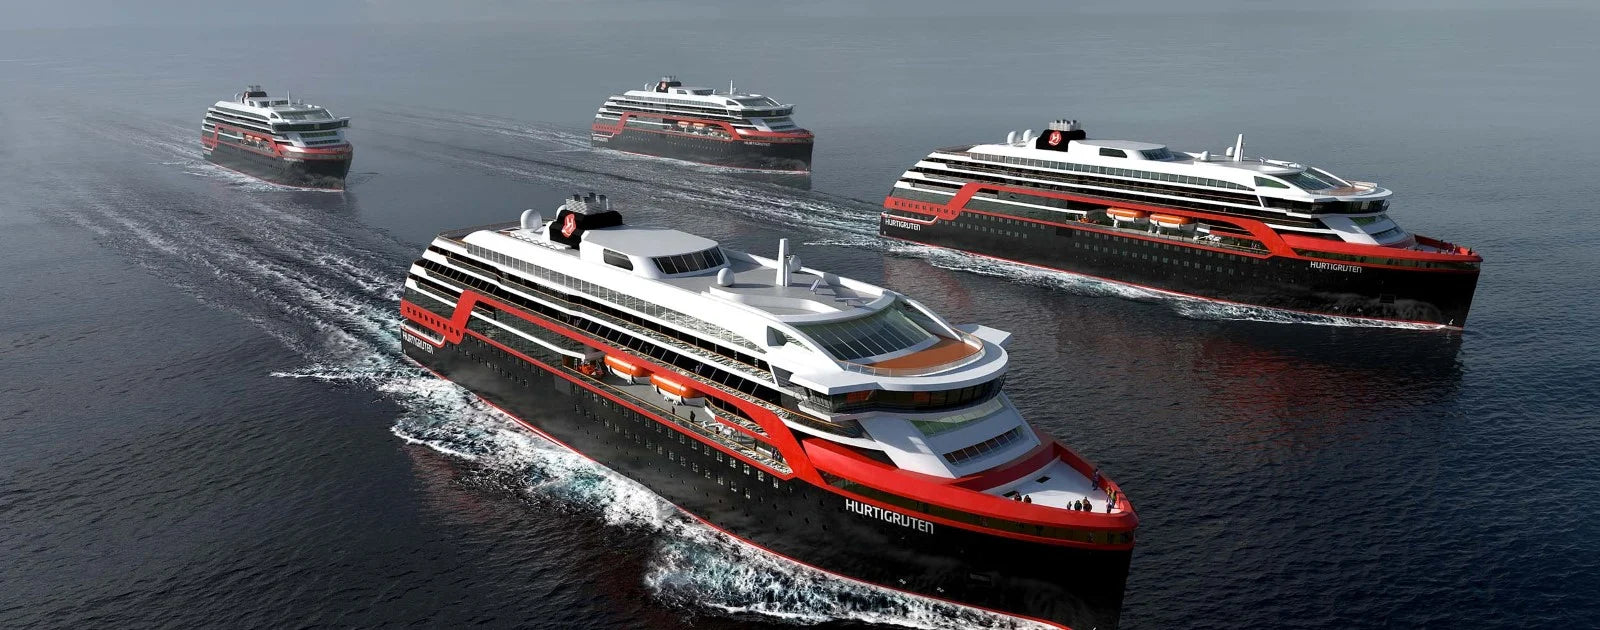 Hurtigruten Expeditions completes SpaceX Starlink installation on entire cruise ship fleet